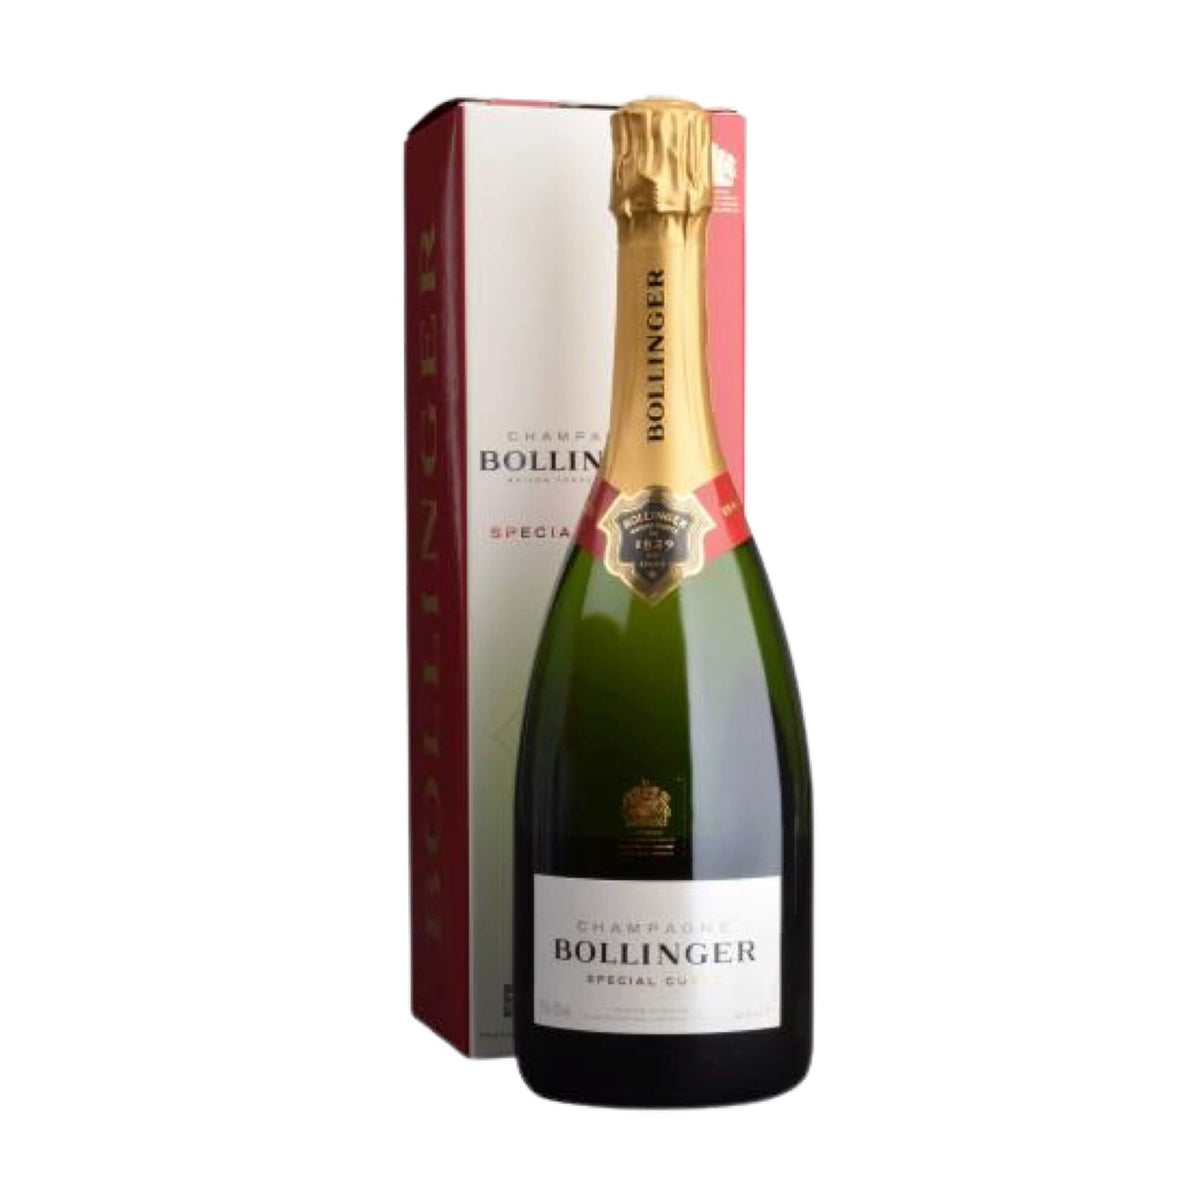 Champagne Bollinger-Champagner-Pinot Noir, Chardonnay, Pinot Meunier-Special Cuvee Brut Champagne AOC-WINECOM